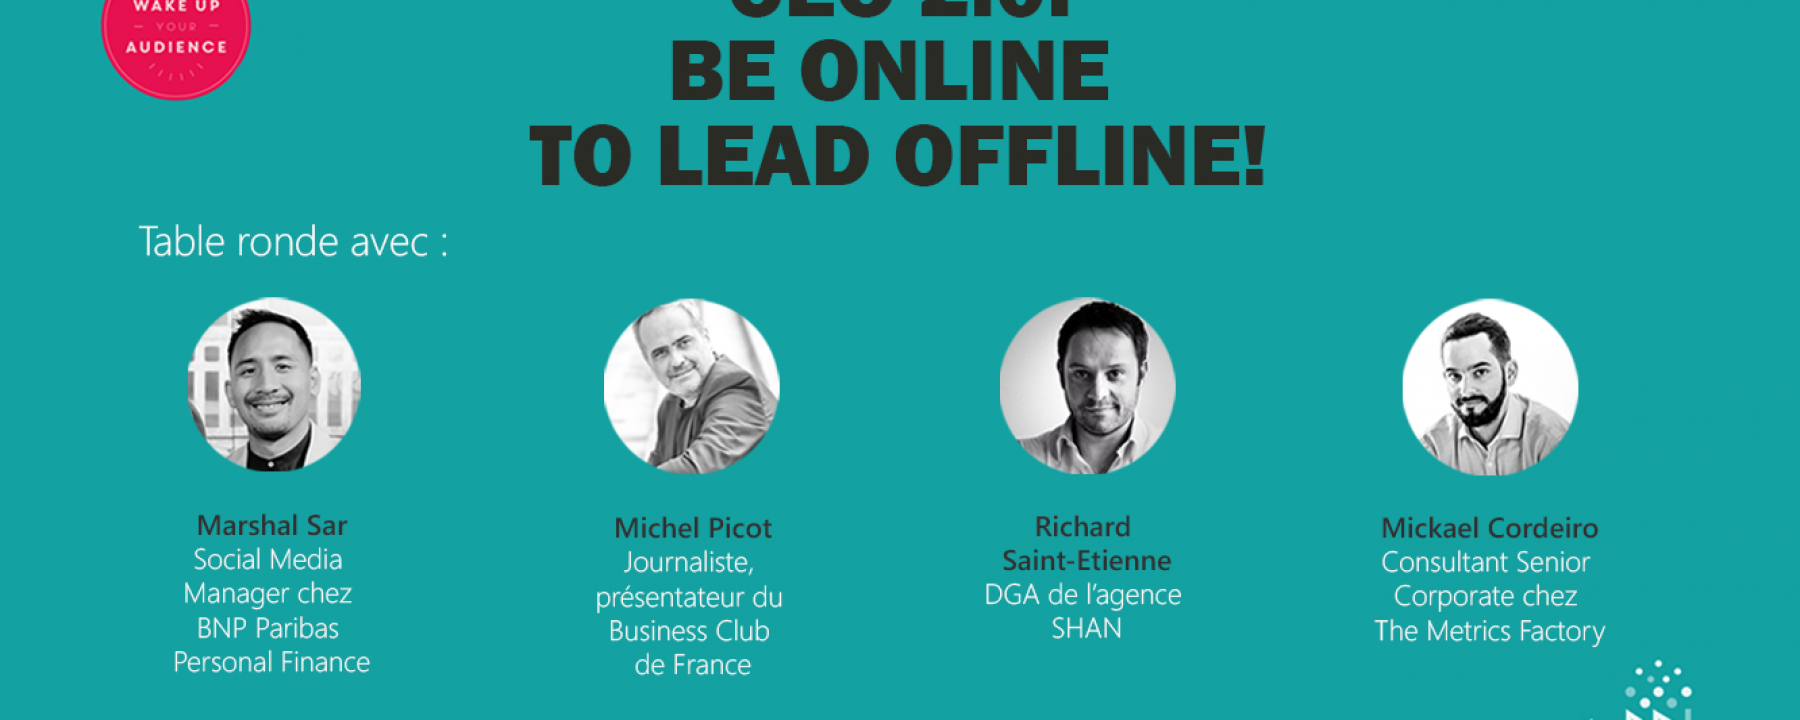 Wake up your audience #5 : CEO 2.0 : be online to lead offline ! 